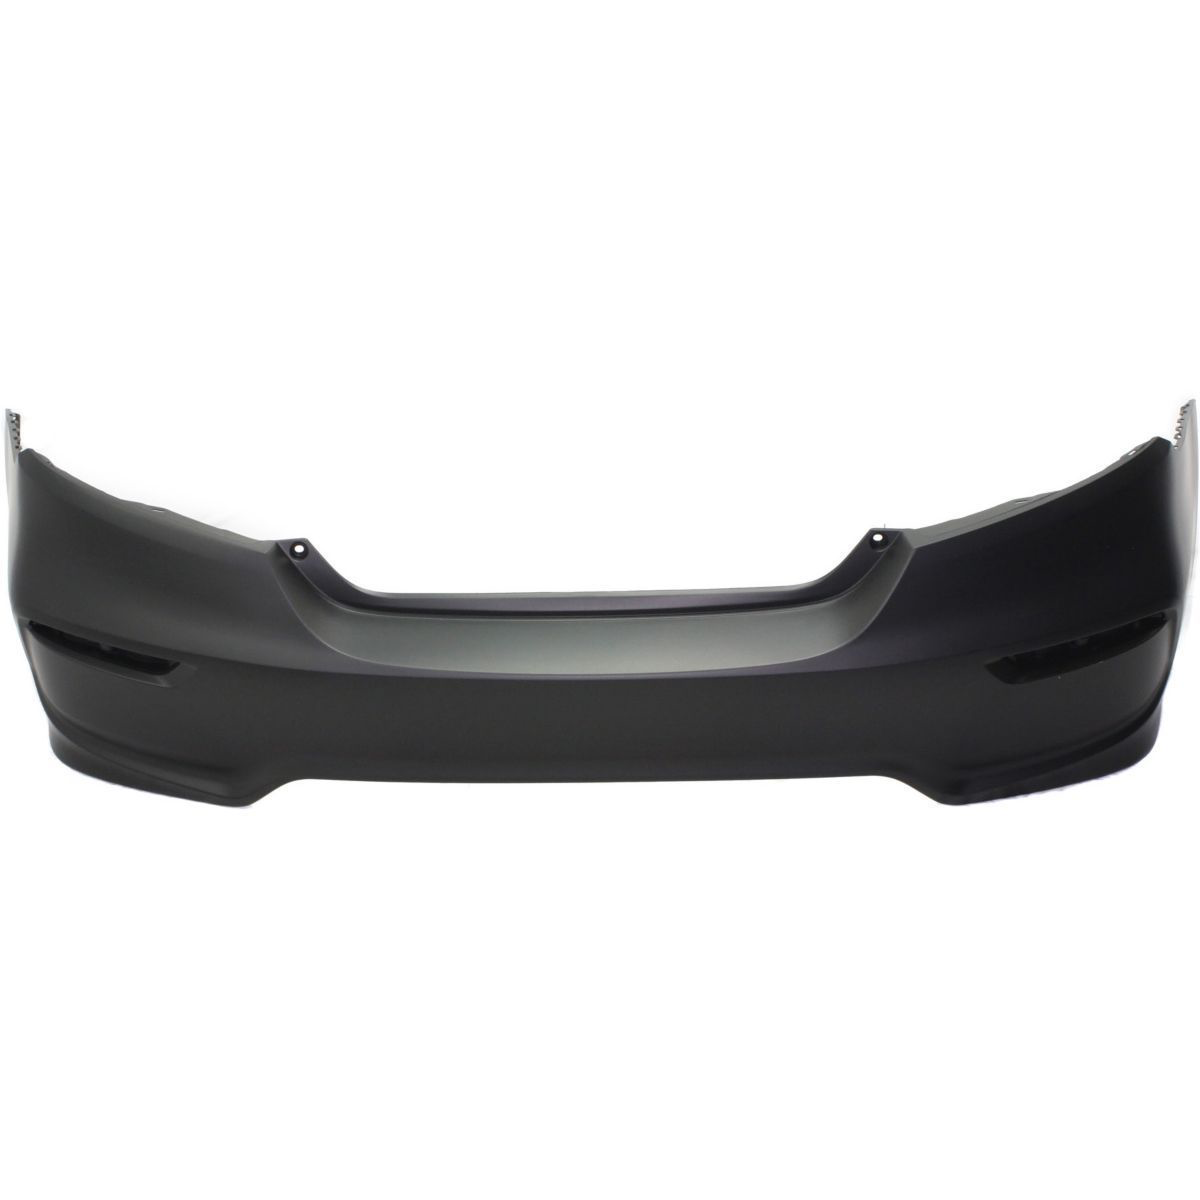 2014-2015 HONDA CIVIC Rear Bumper Cover Coupe Painted to Match